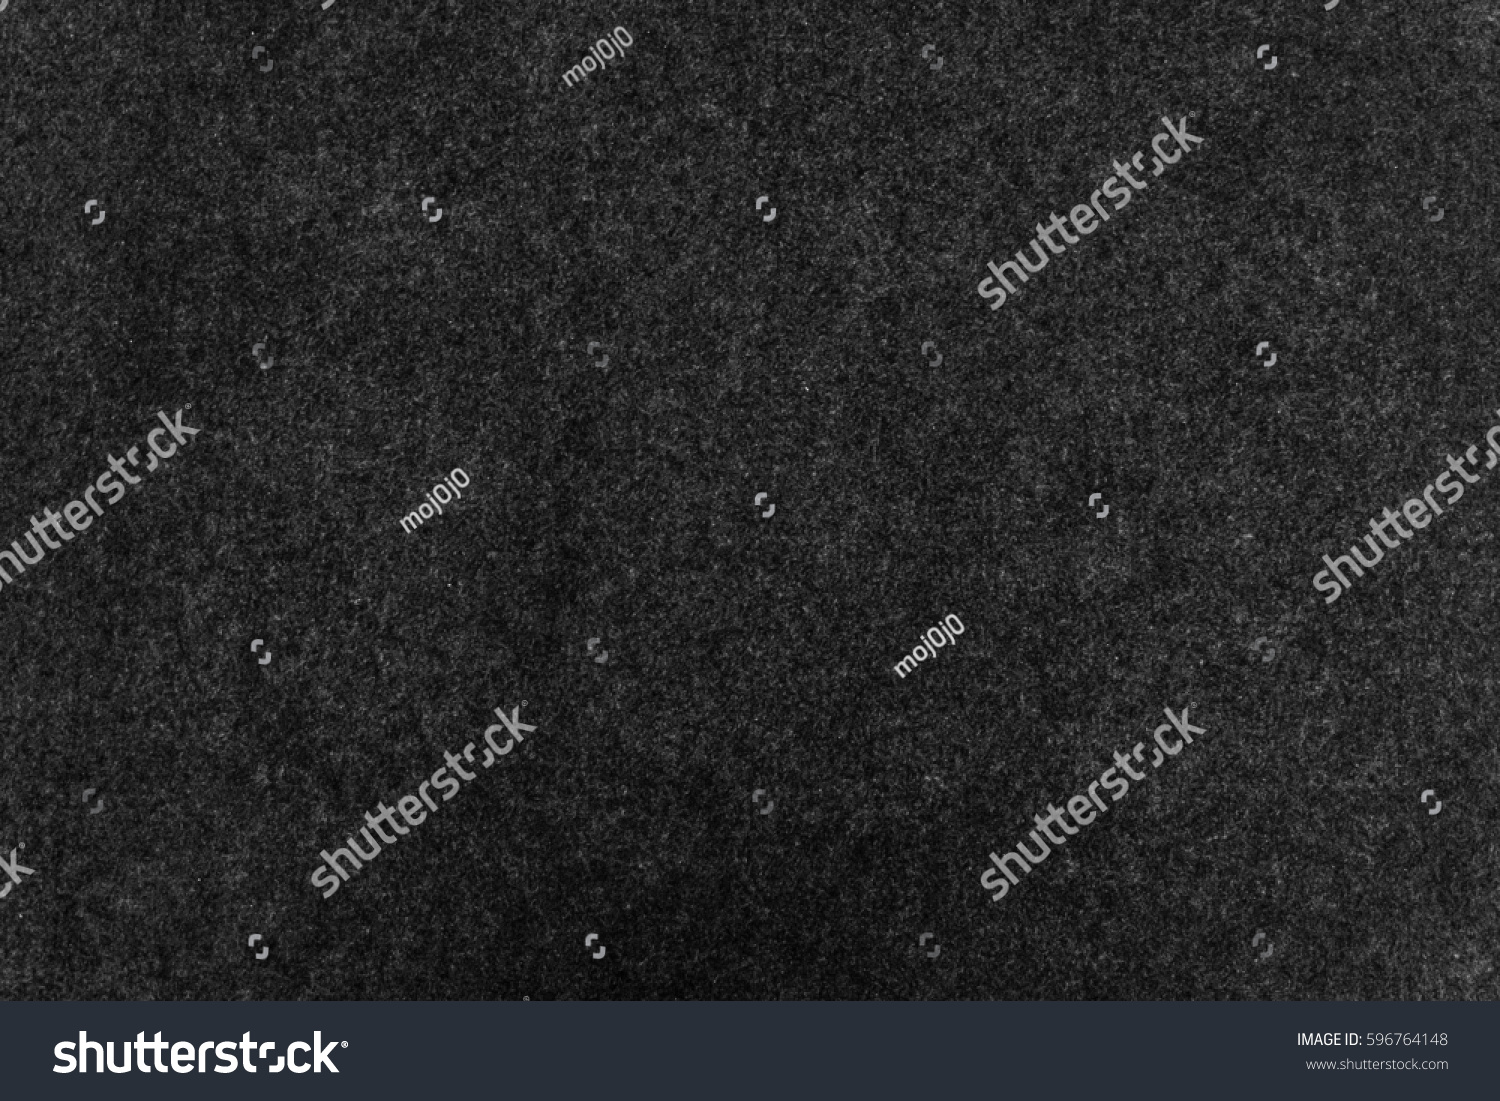 Black Granite tile texture and background #596764148